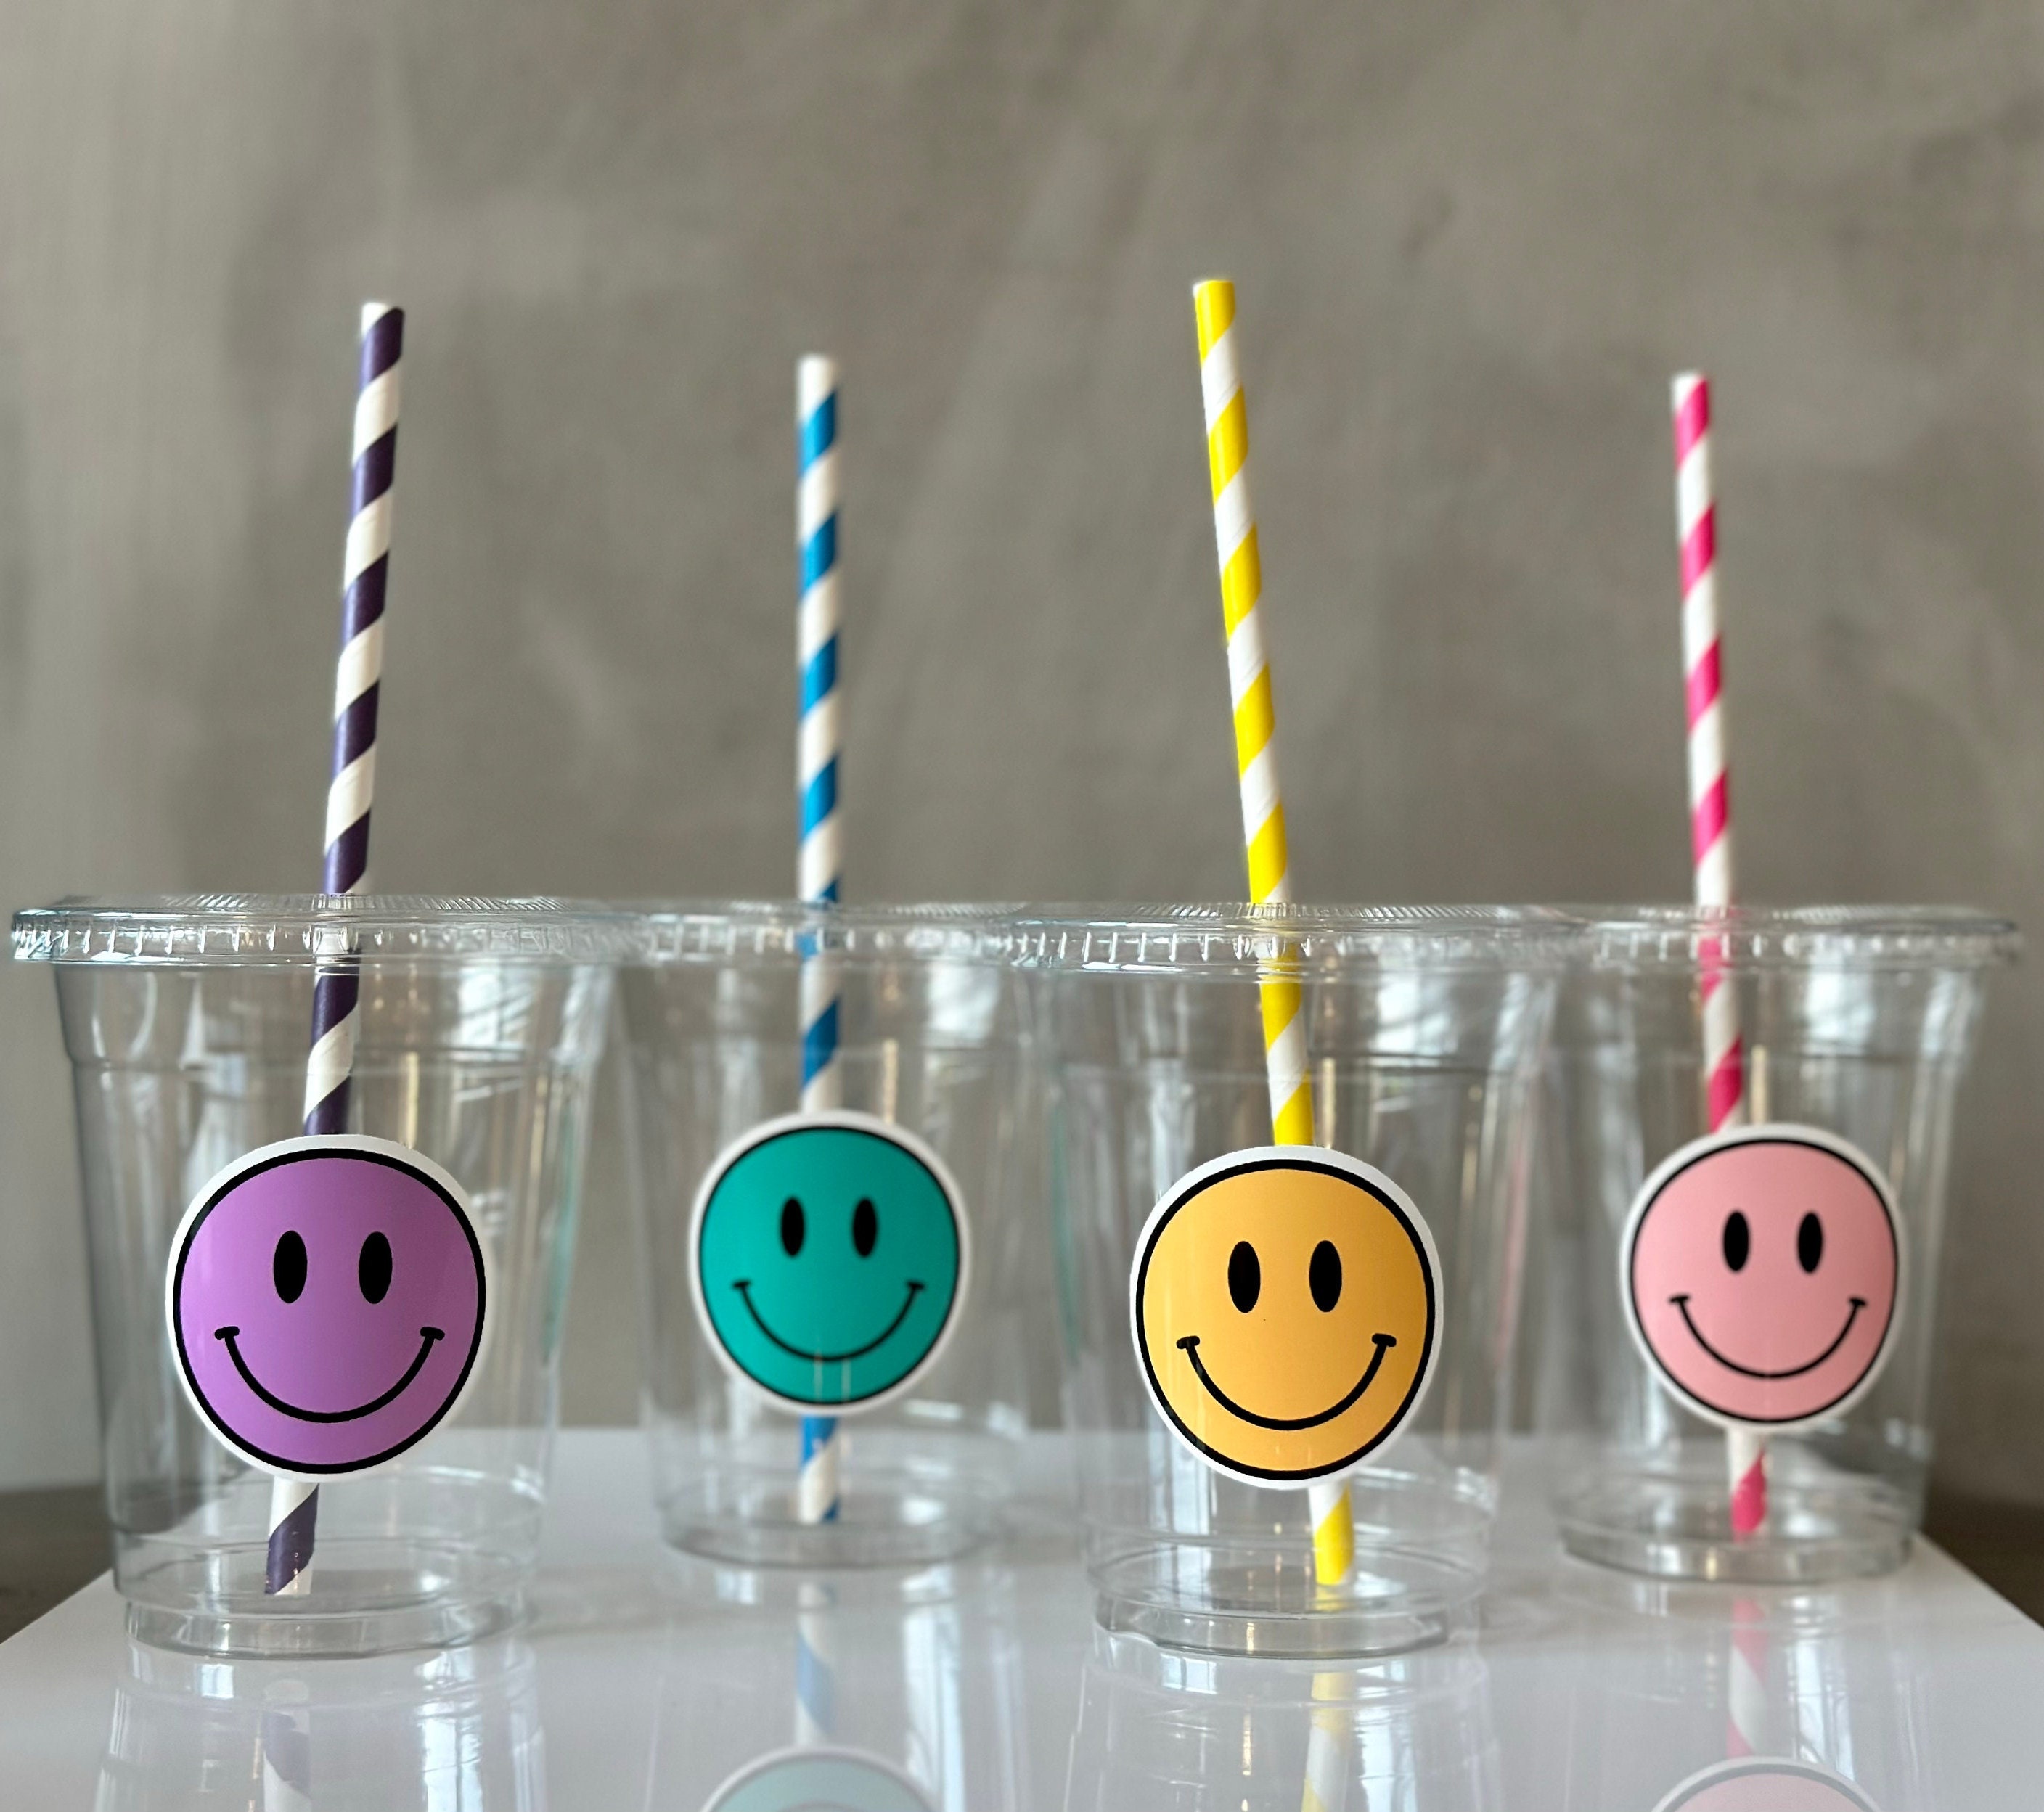 Smiley face straw topper happy face with glasses